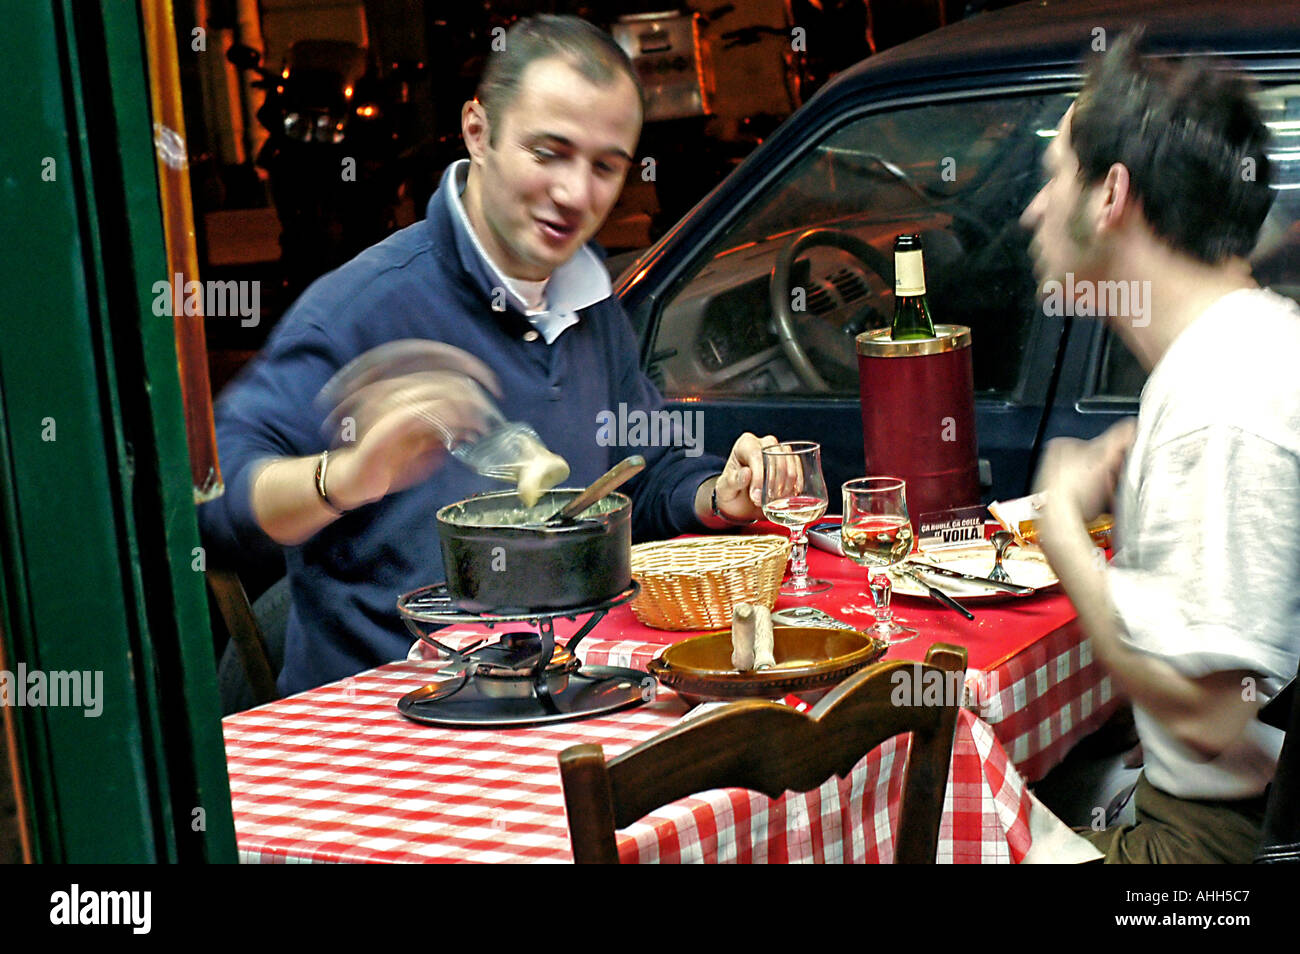 Paris France, French Restaurant "GR5" "Savoyard Region Specialty" 2 Male Friends Sharing "Cheese Fondue" on Terrace, French dining, france gastronomy Stock Photo